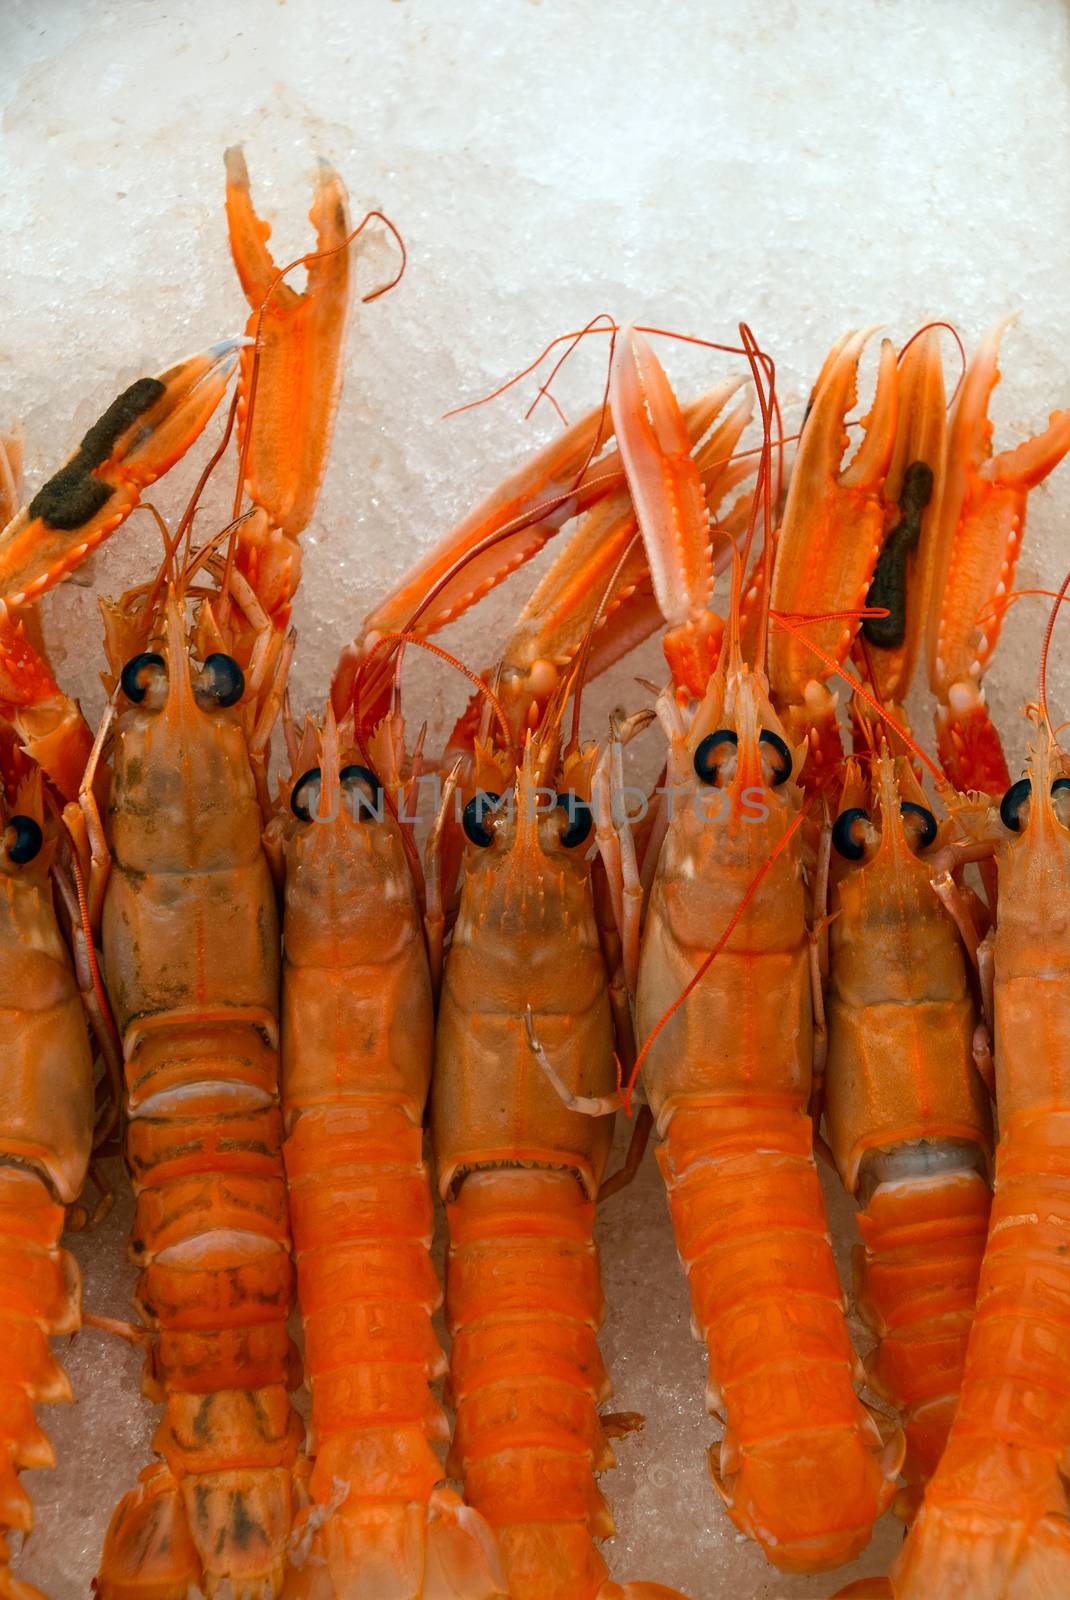 Close up fresh catch of raw red langoustines (Nephrops norvegicus, Norway lobster, Dublin Bay prawn or scampi) on ice at retail market display, top view, directly above